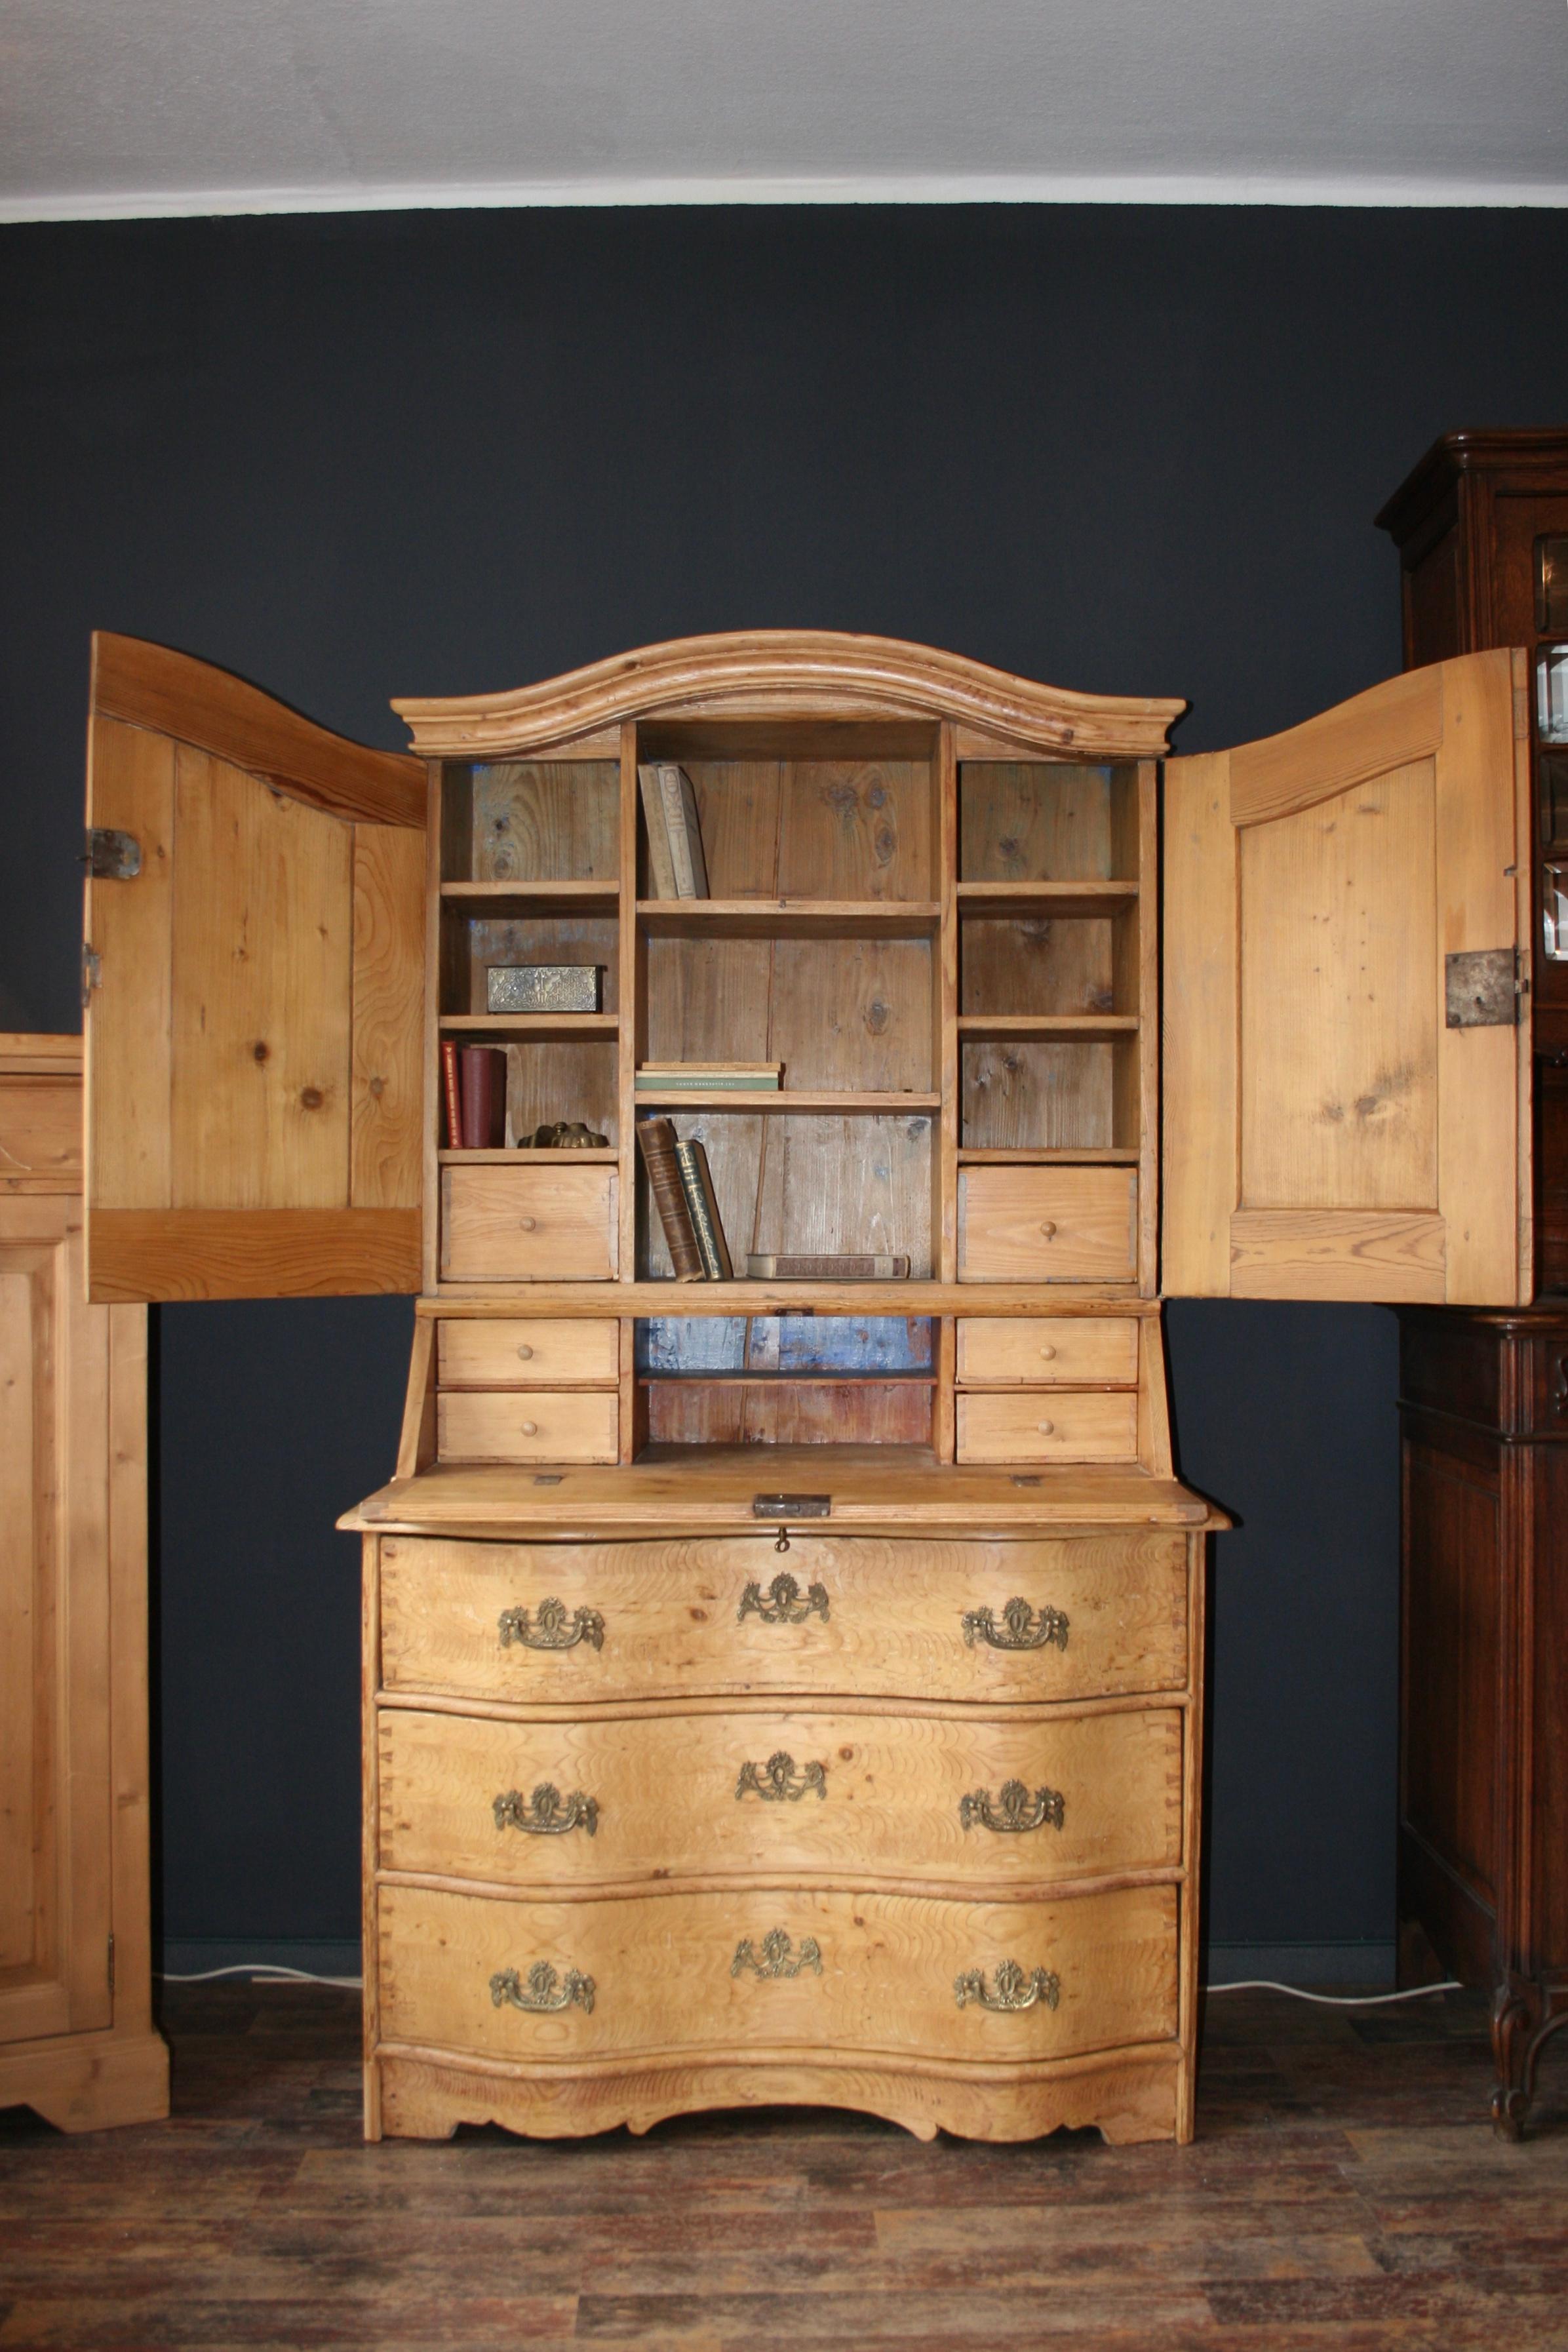 Antique baroque secretaire made of pine wood, 18th century, circa 1750.
The secretary consists of a top and a bottom. The curved lower part (like a Baroque chest of drawers) has 3 drawers, on whose fronts one can recognize the dovetail connections,